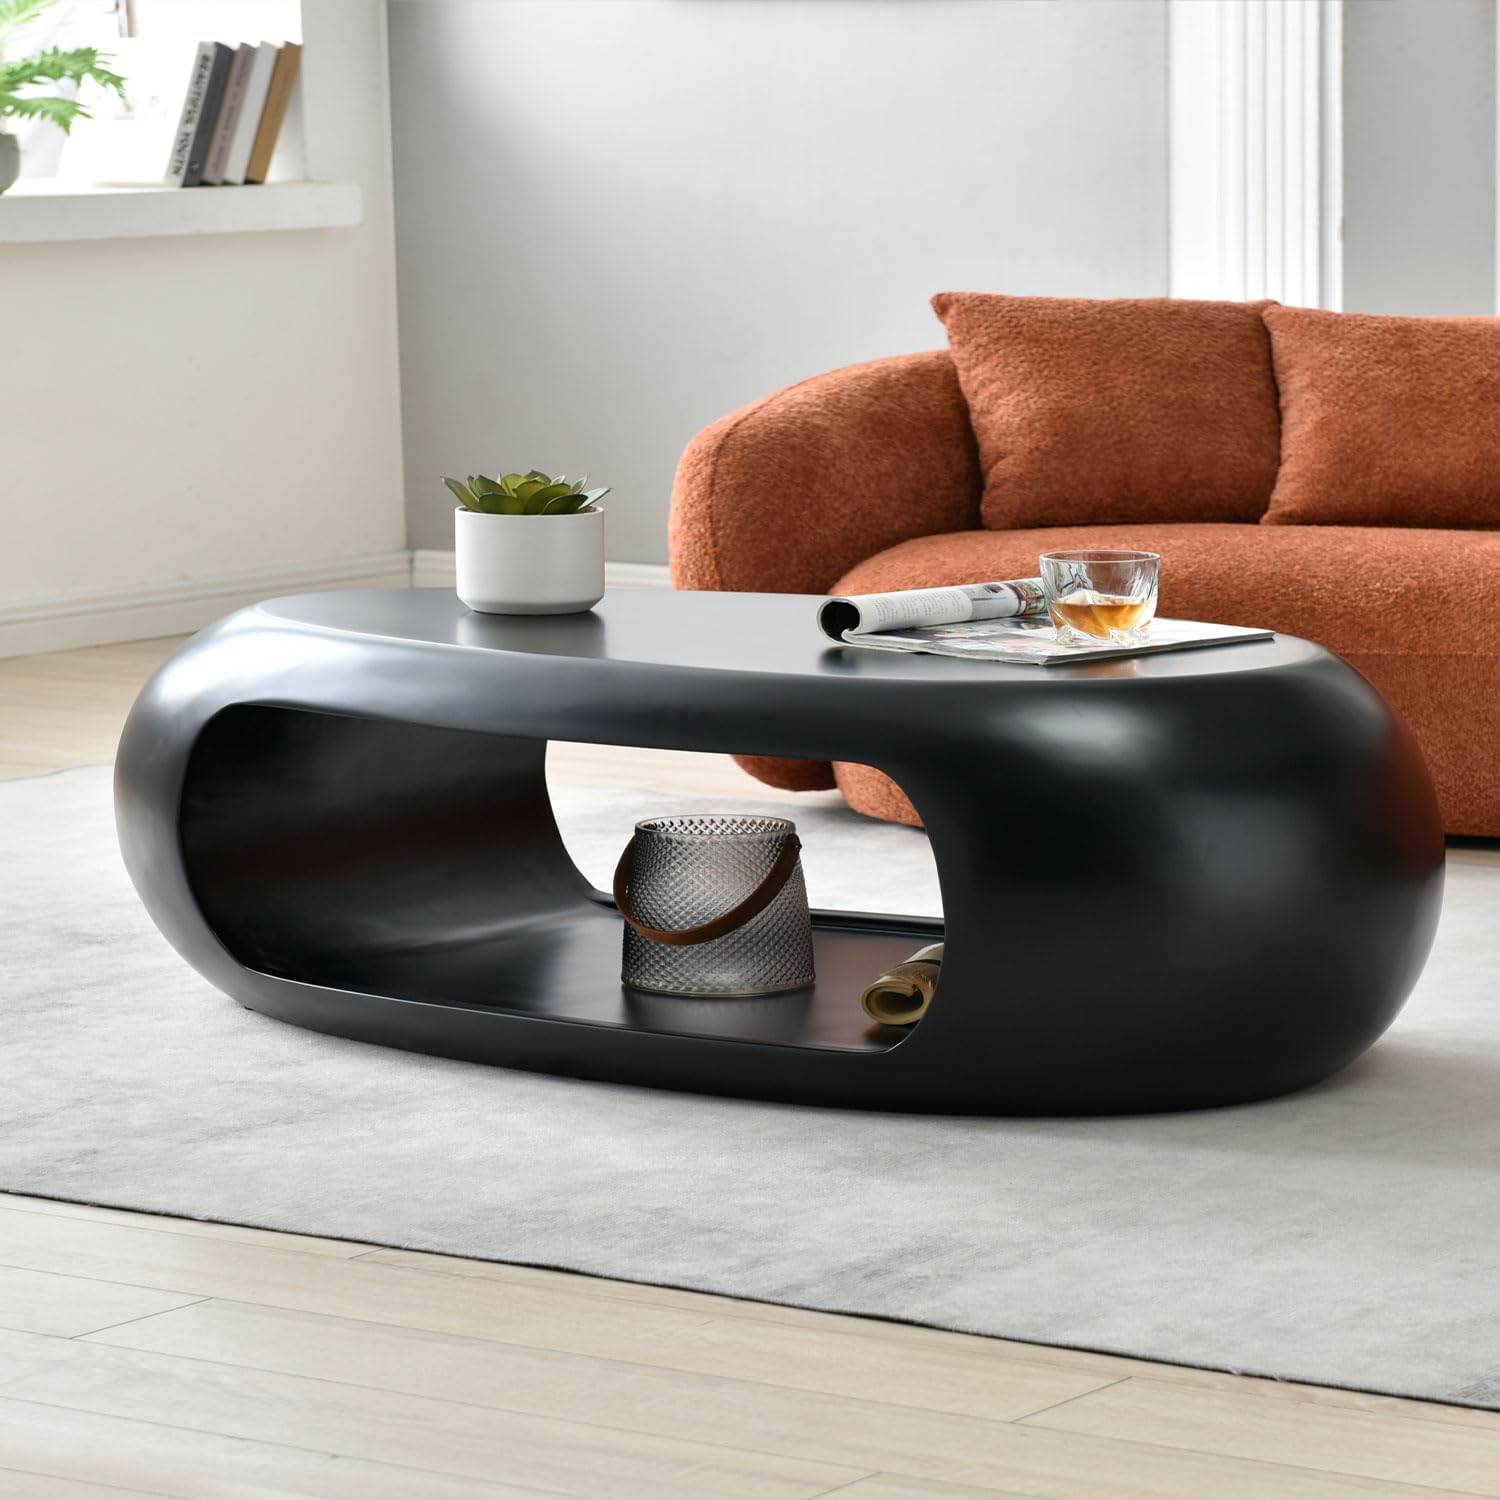 WILLIAMSPACE 55.11 Modern Black Oval Coffee Table with Storage for Living Room, Fiberglass Coffee Table, Double Layer Coffee Table Side Table End Table, No Assembly, 55.11*22.83*14.96 (Black)